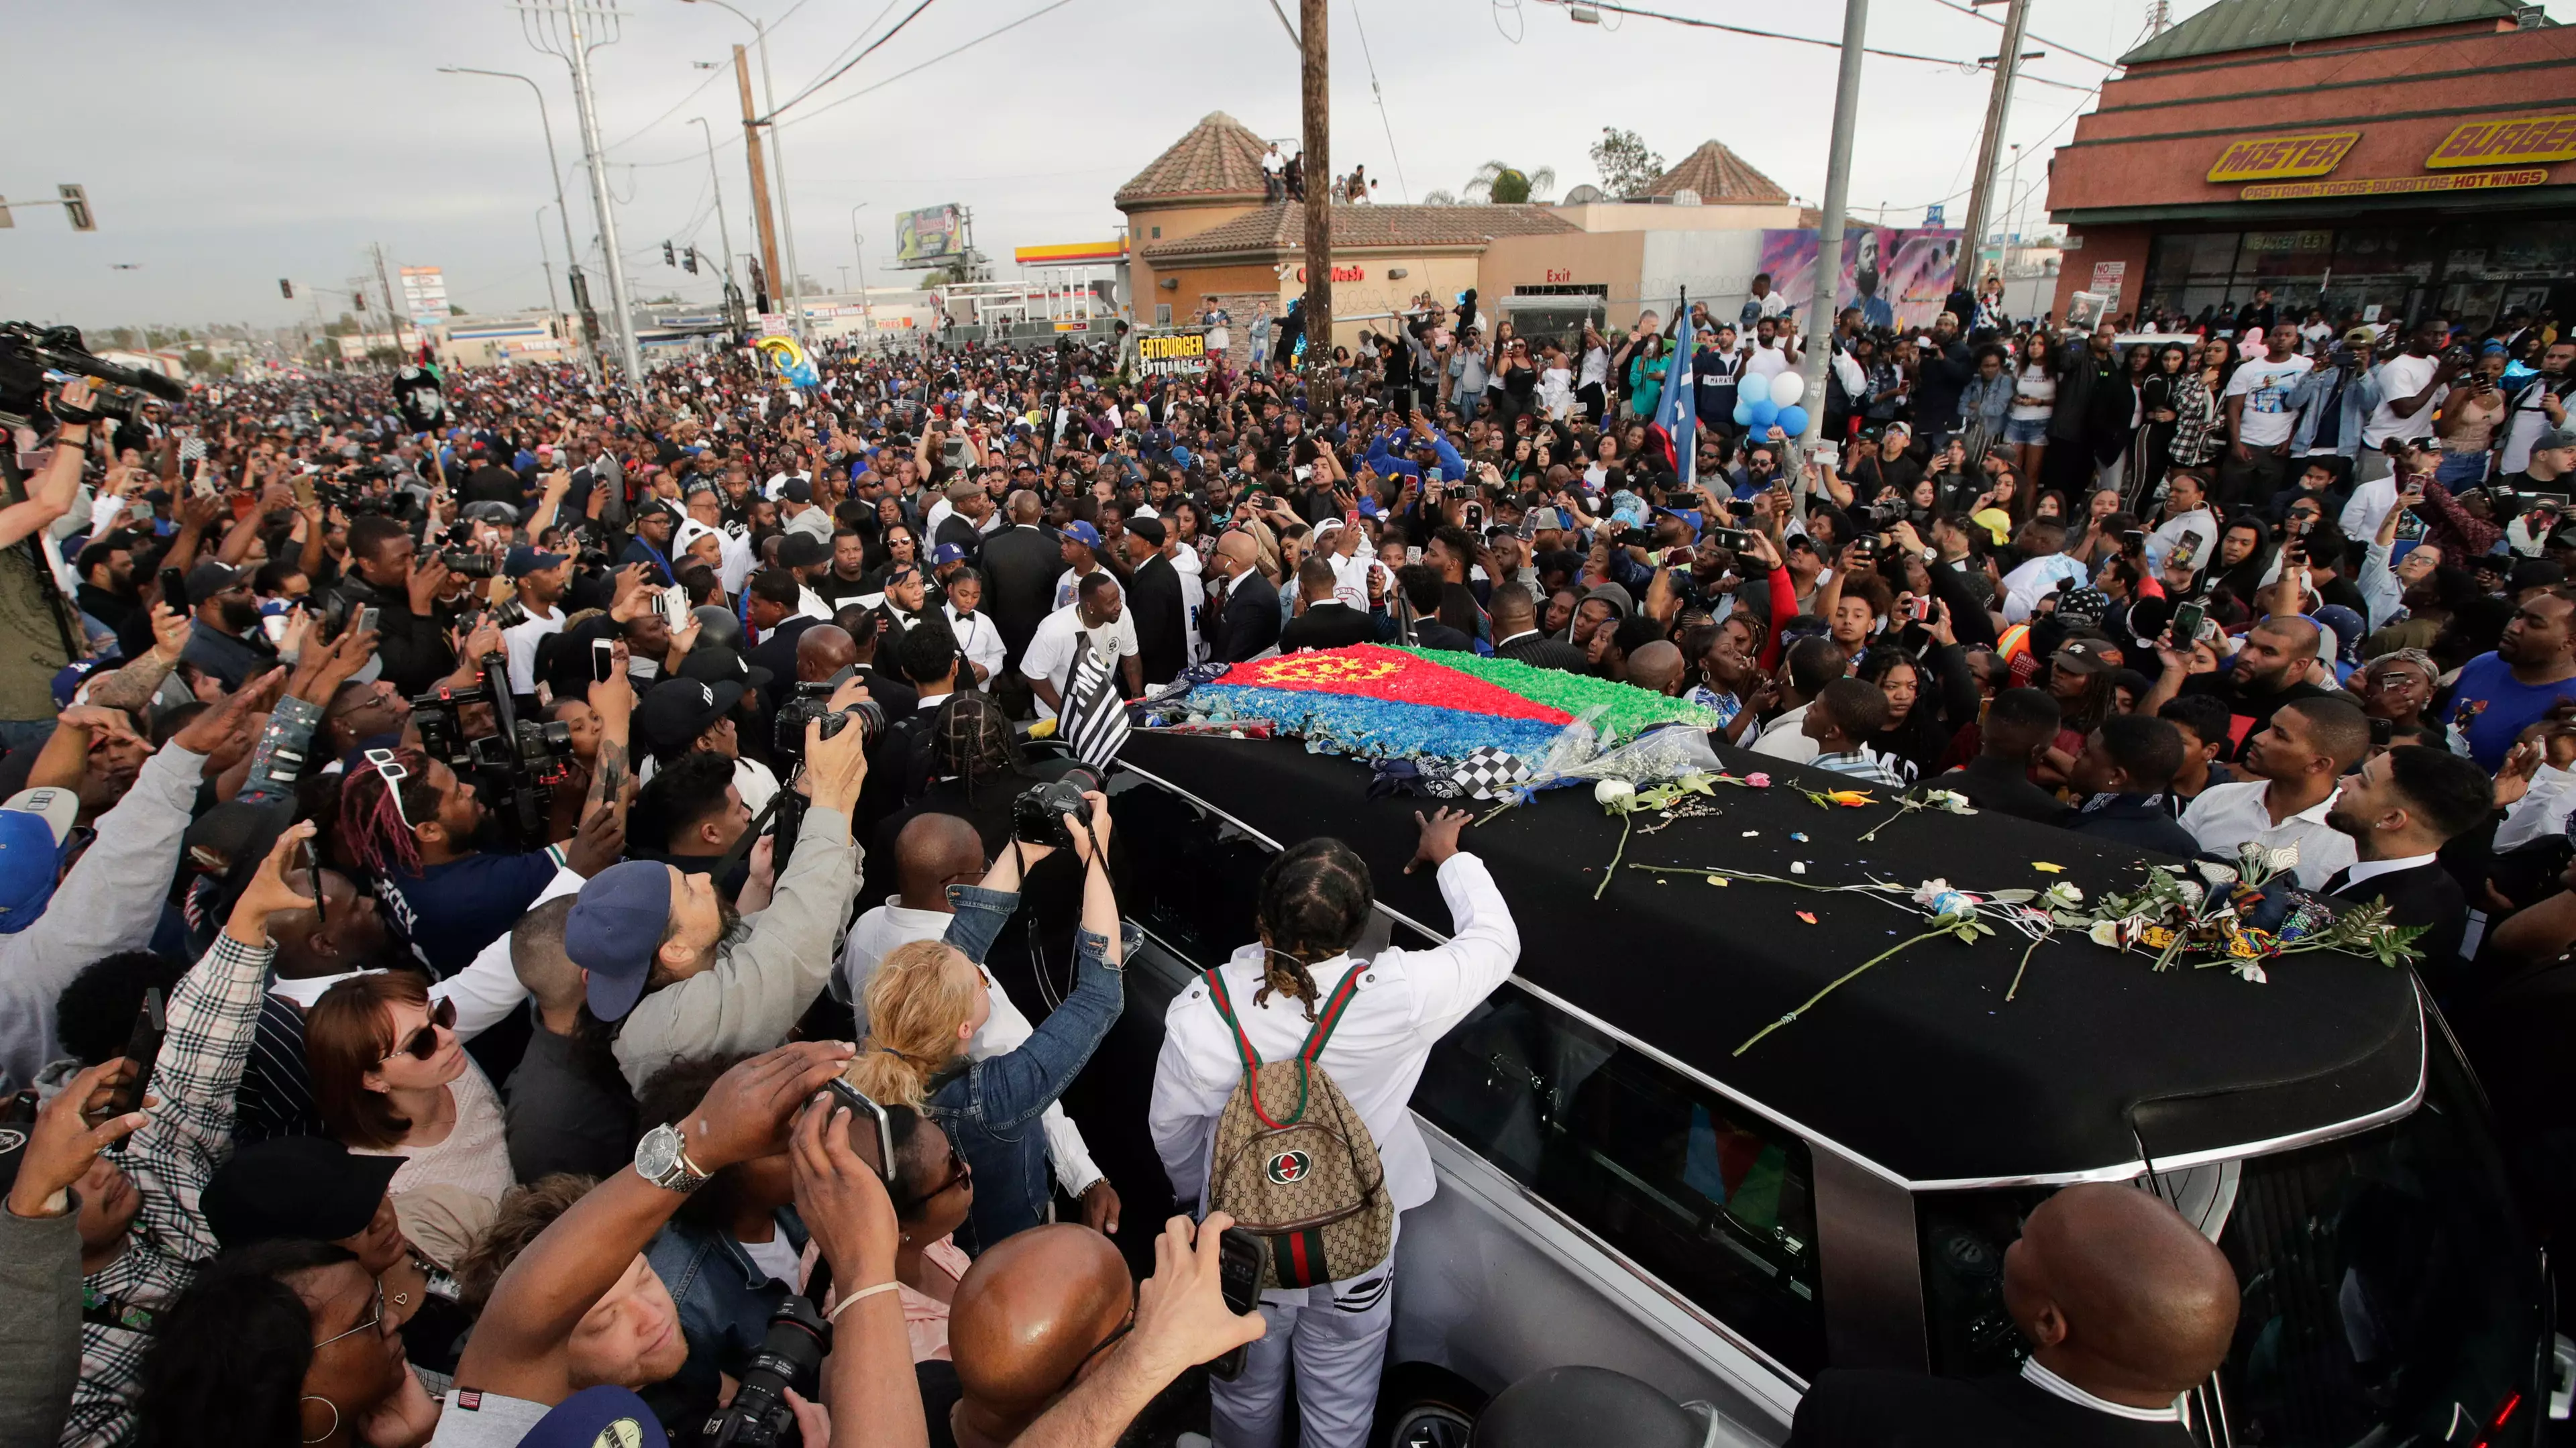 One Person Killed And Three Injured During Drive-By At Nipsey Hussle's Funeral